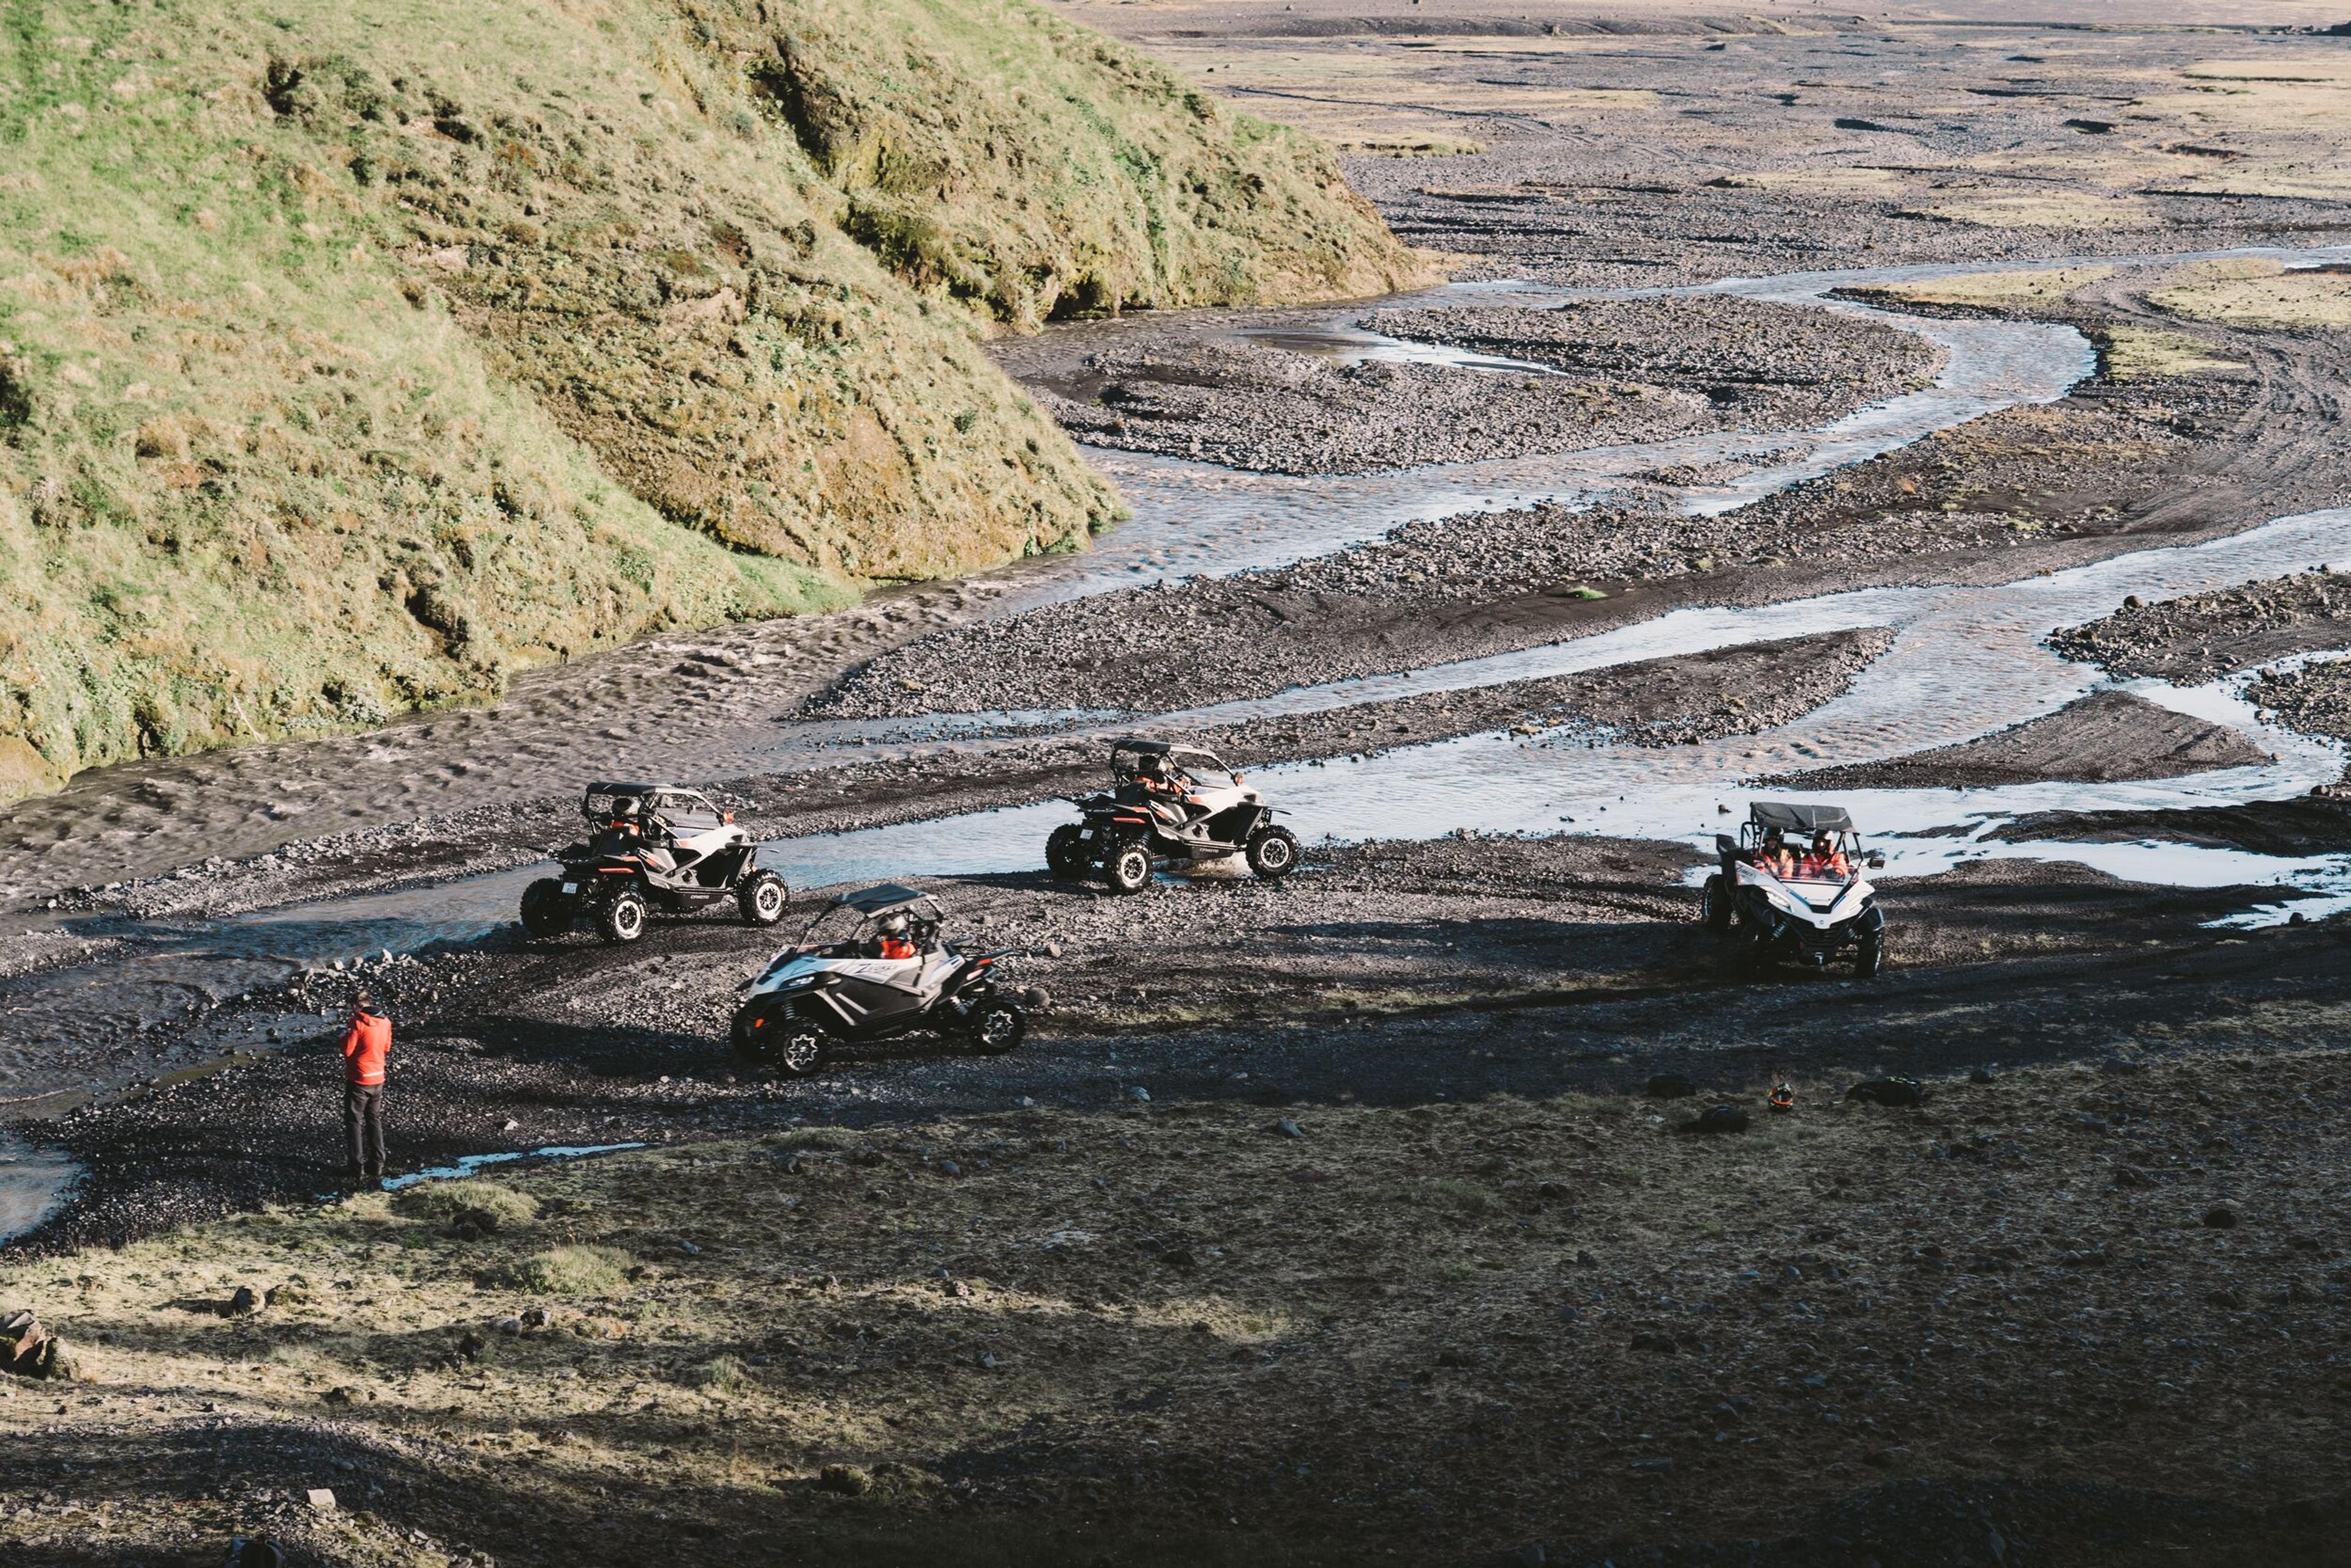 A group of off-road vehicles is navigating through a muddy, winding riverbed